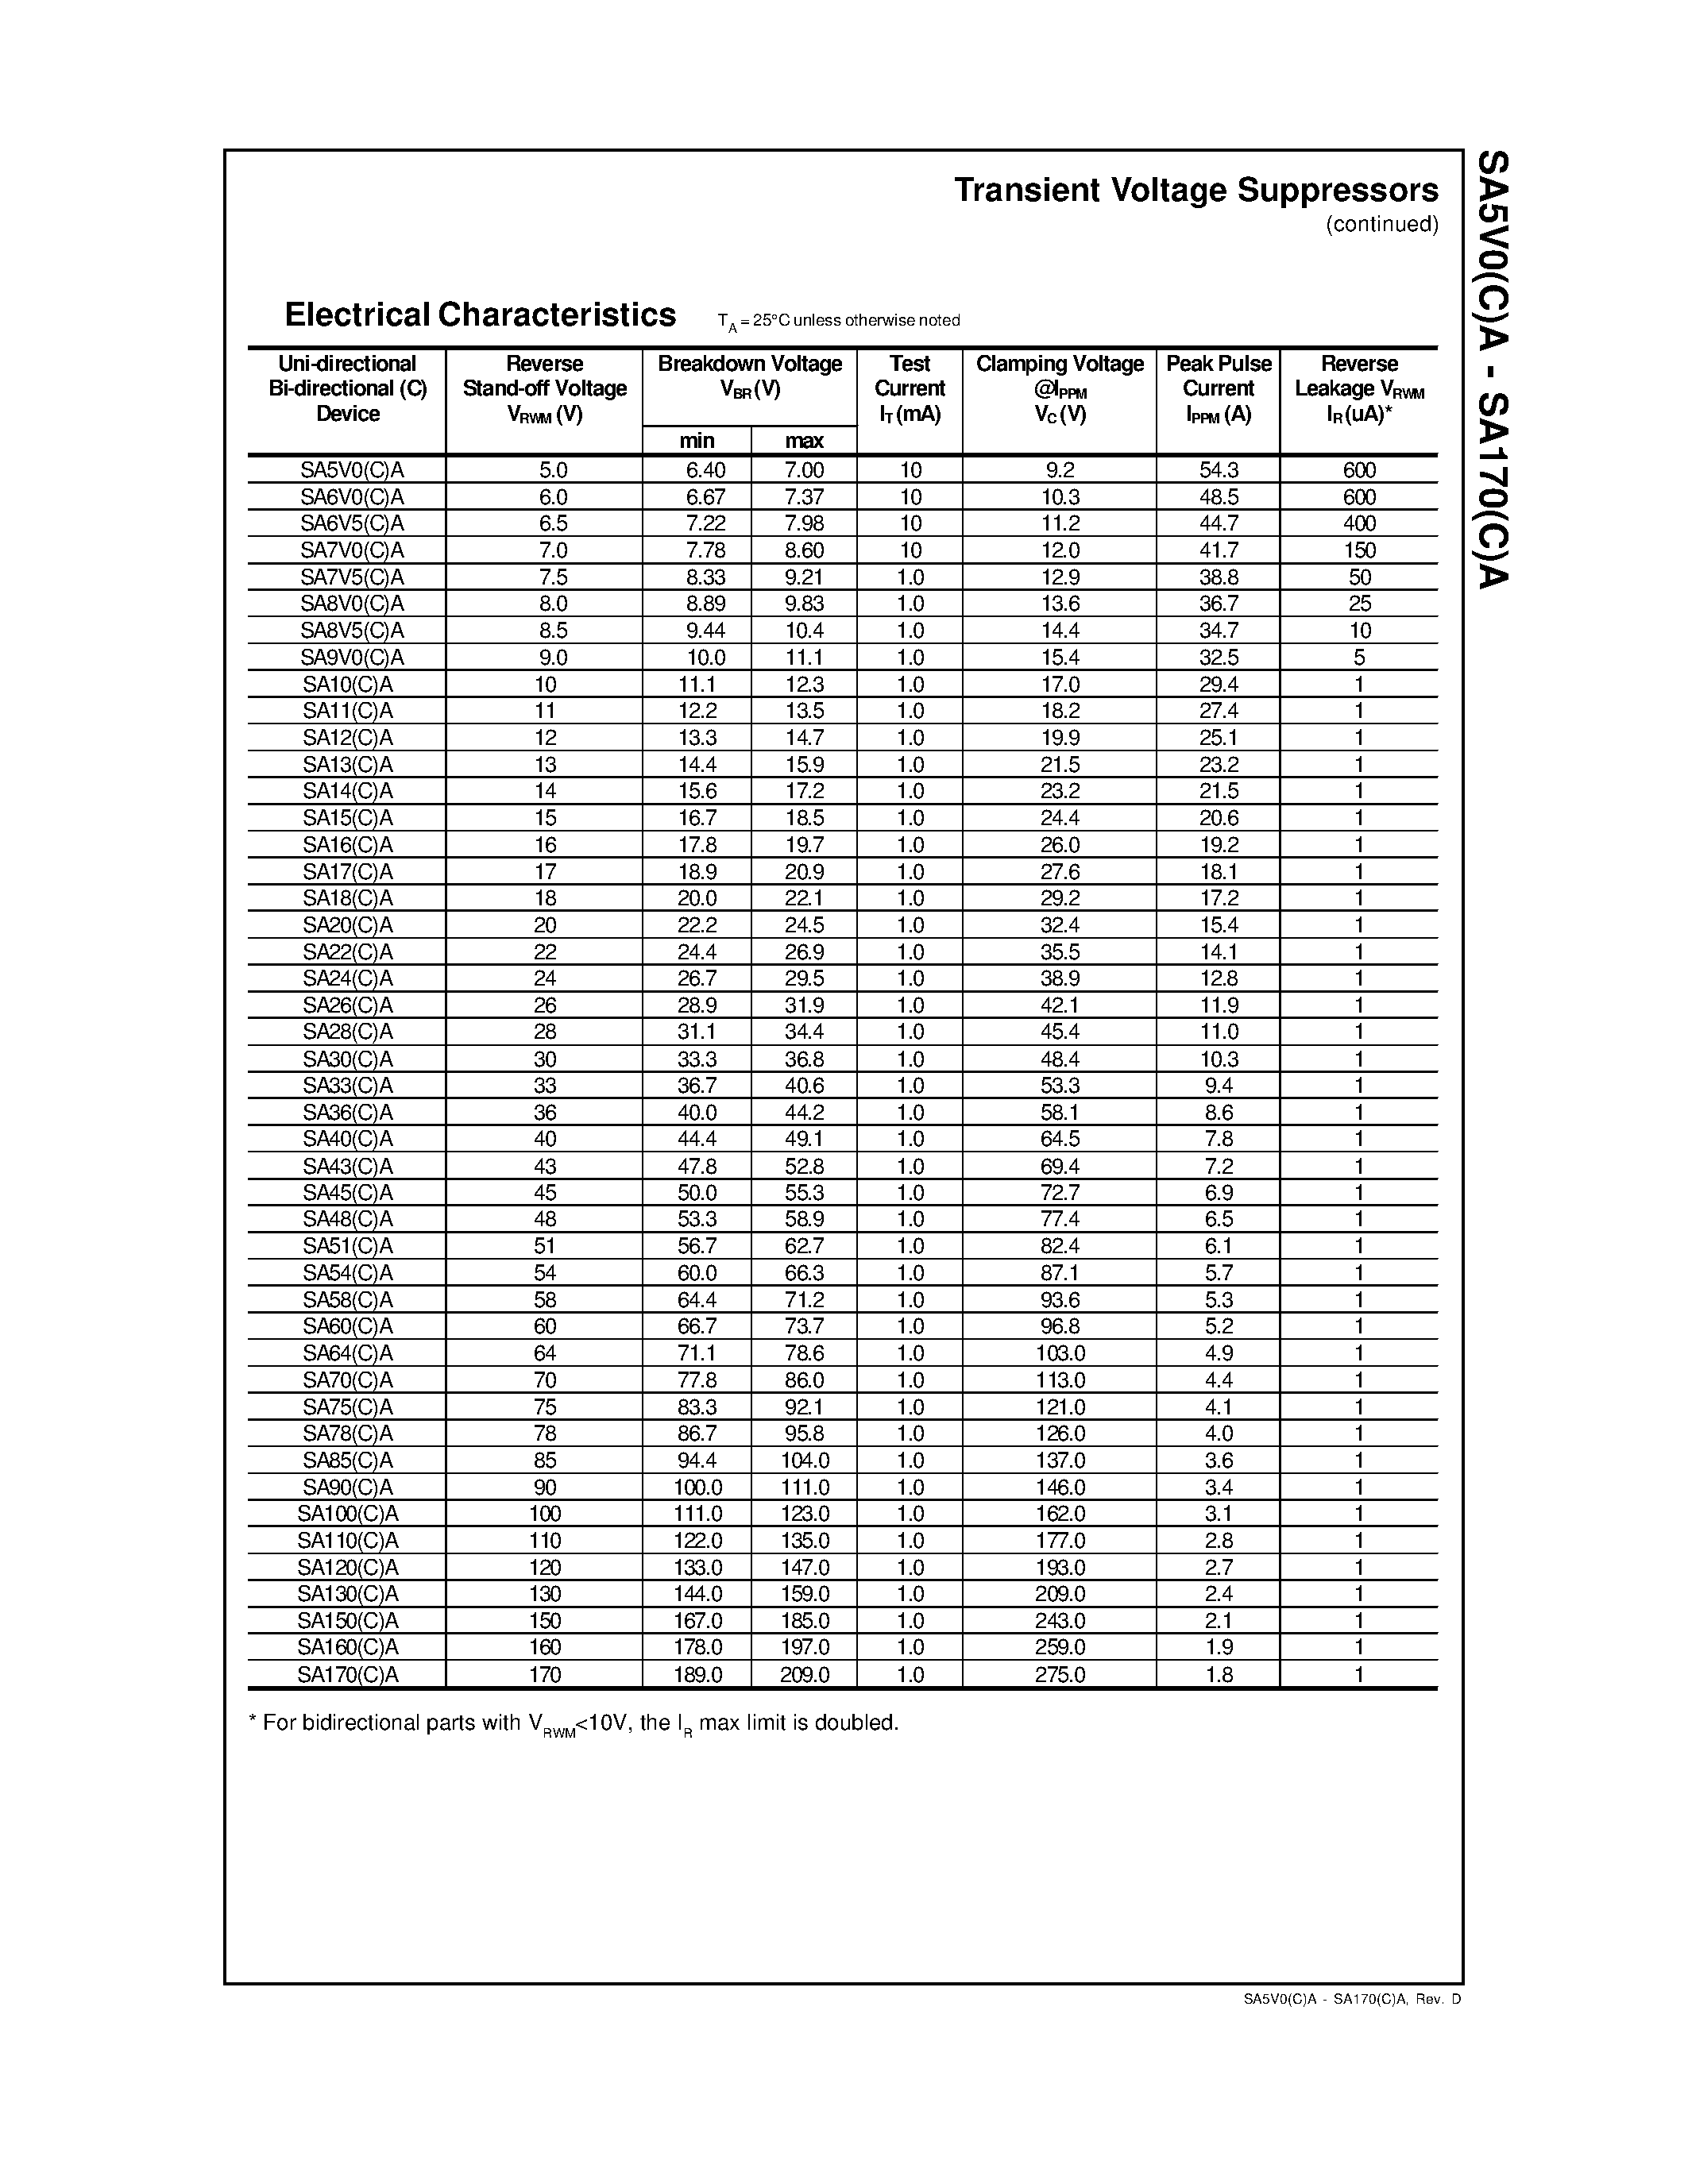 Datasheet SA33A - Transient Voltage Suppressors page 2